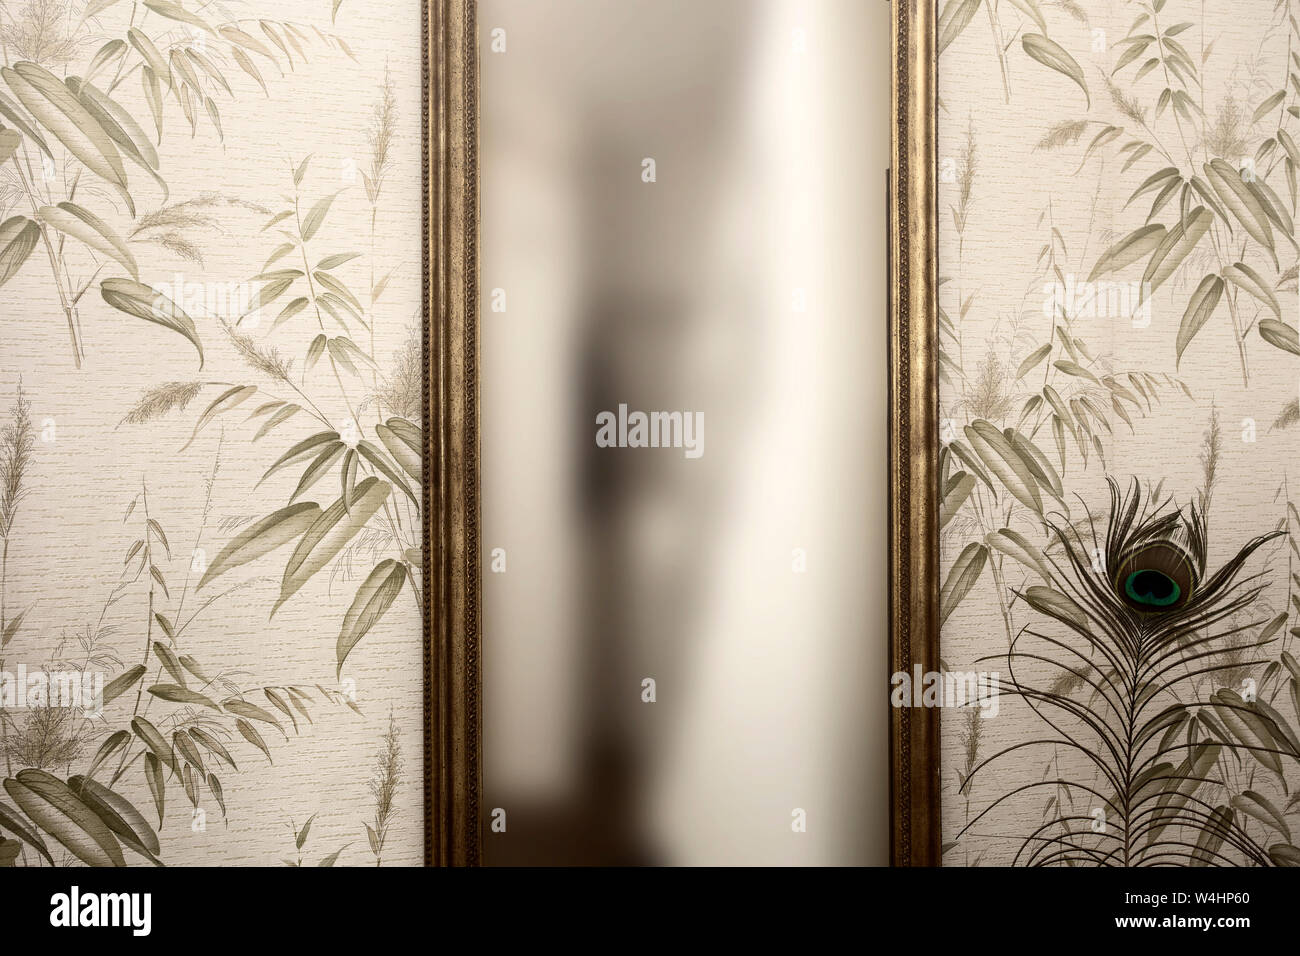 Long vintage mirror on wall with wallpaper and peacock feather antique retro design Stock Photo